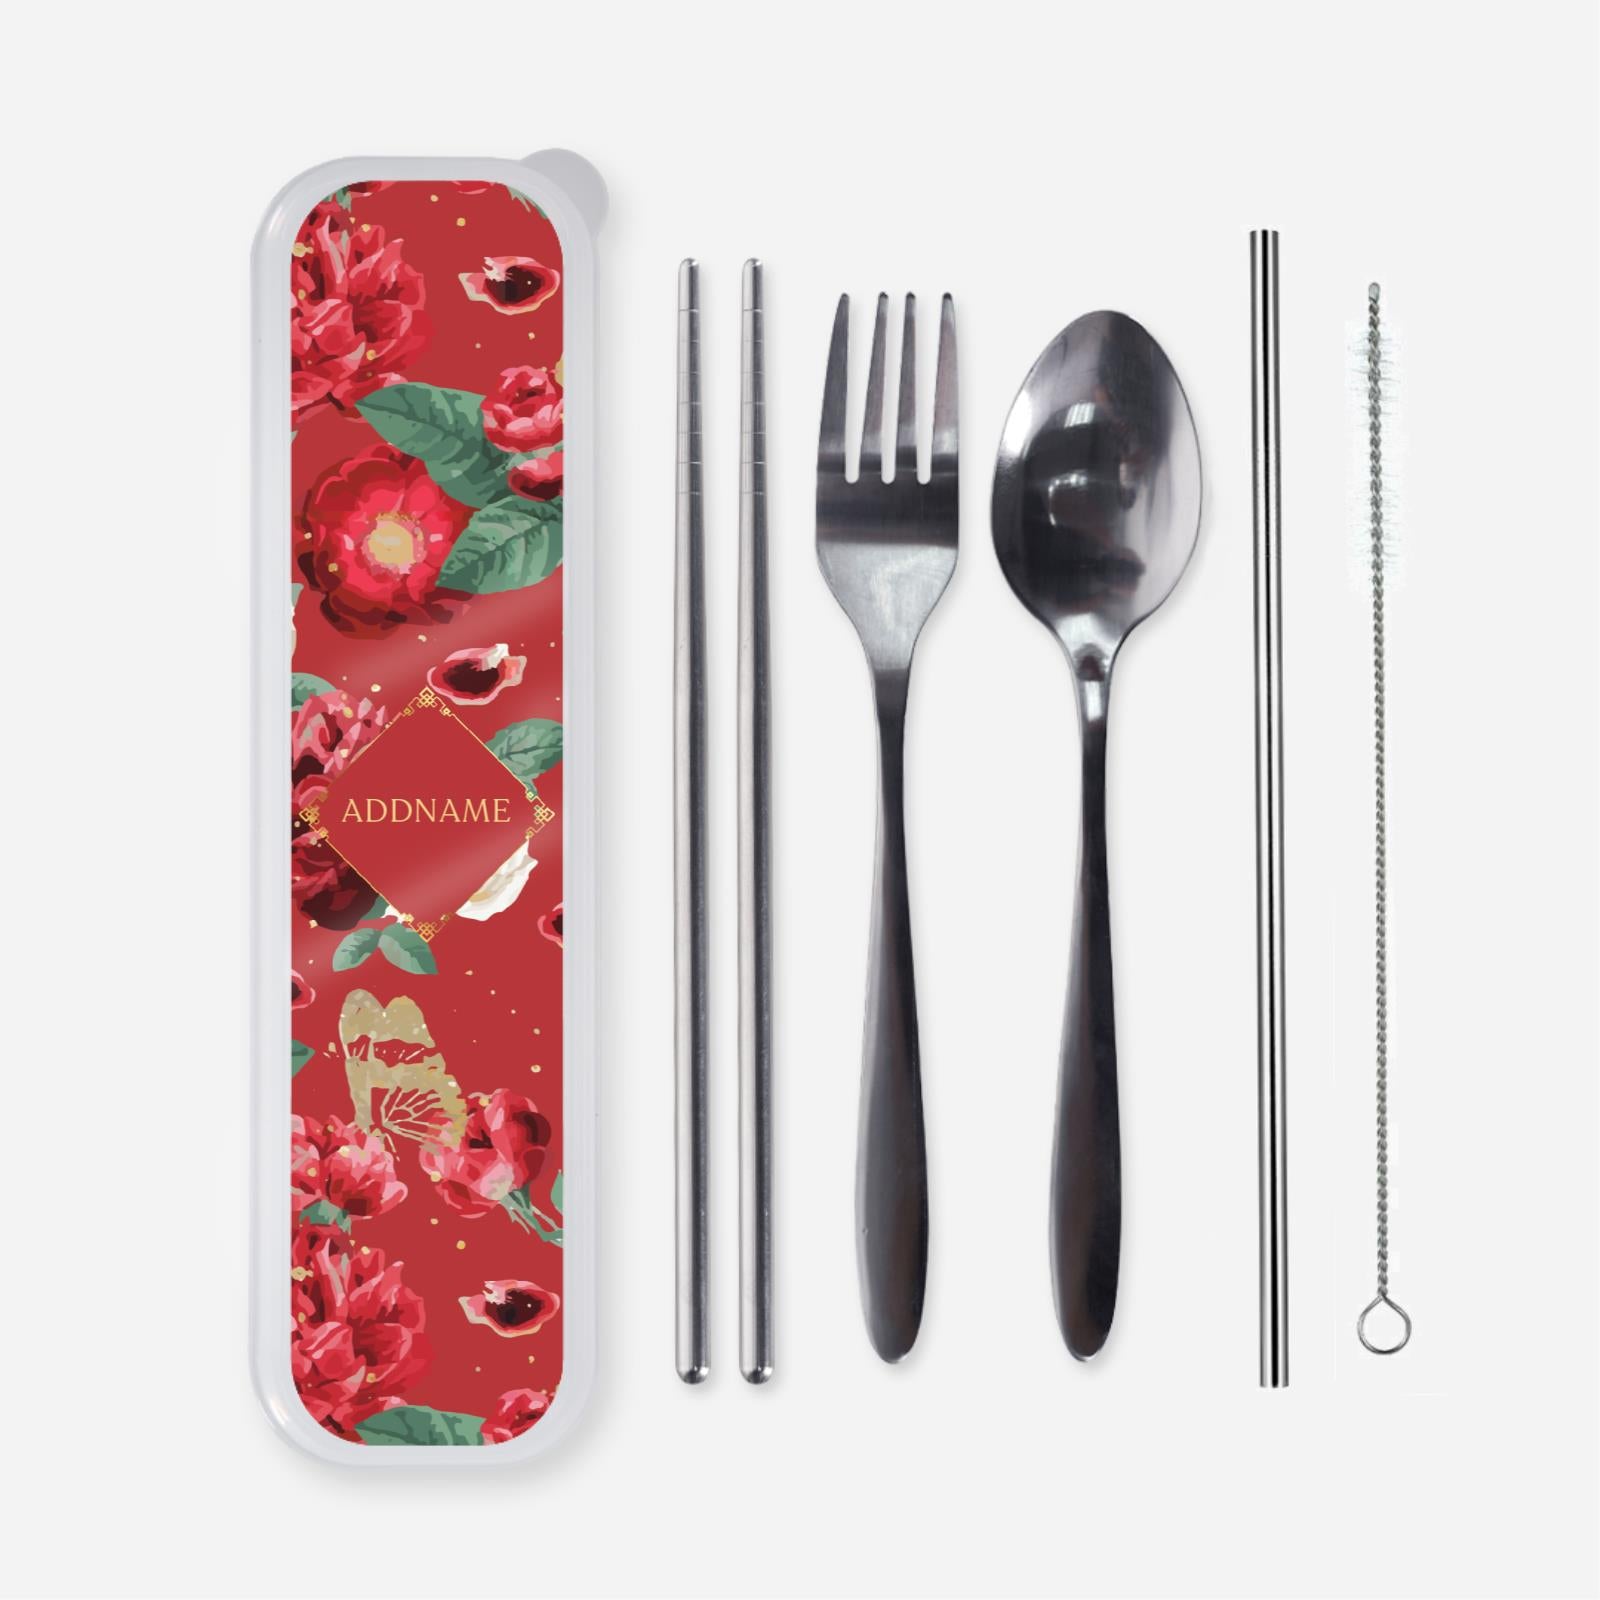 Royal Floral Series - Scorching Passion Cutlery With English Personalization